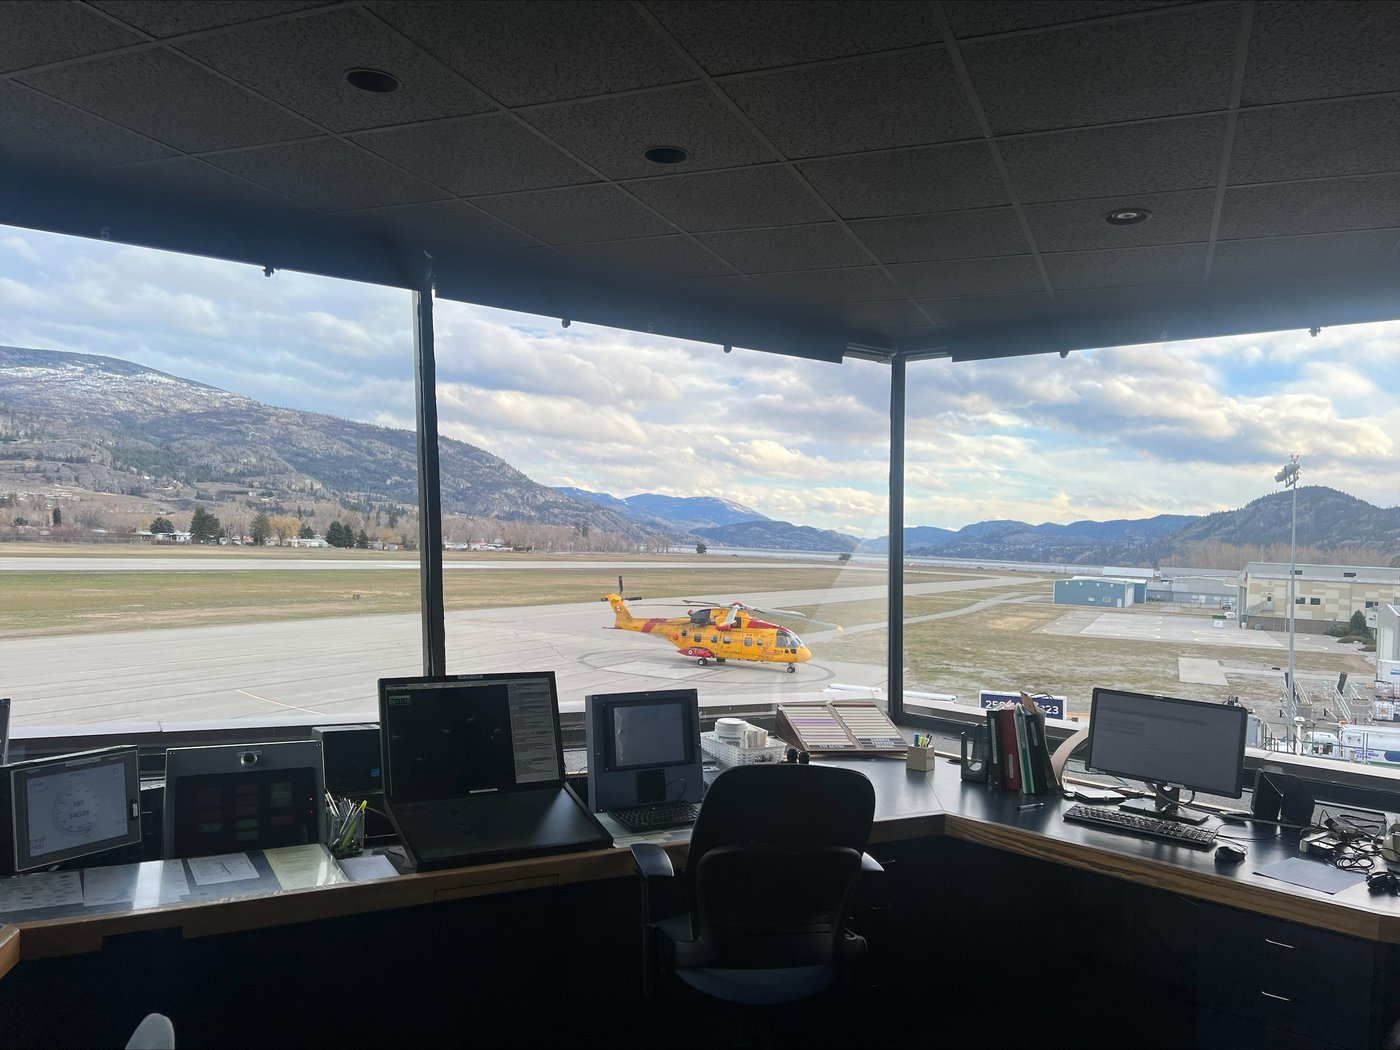 The busy, quick pace of overseeing air traffic in Penticton